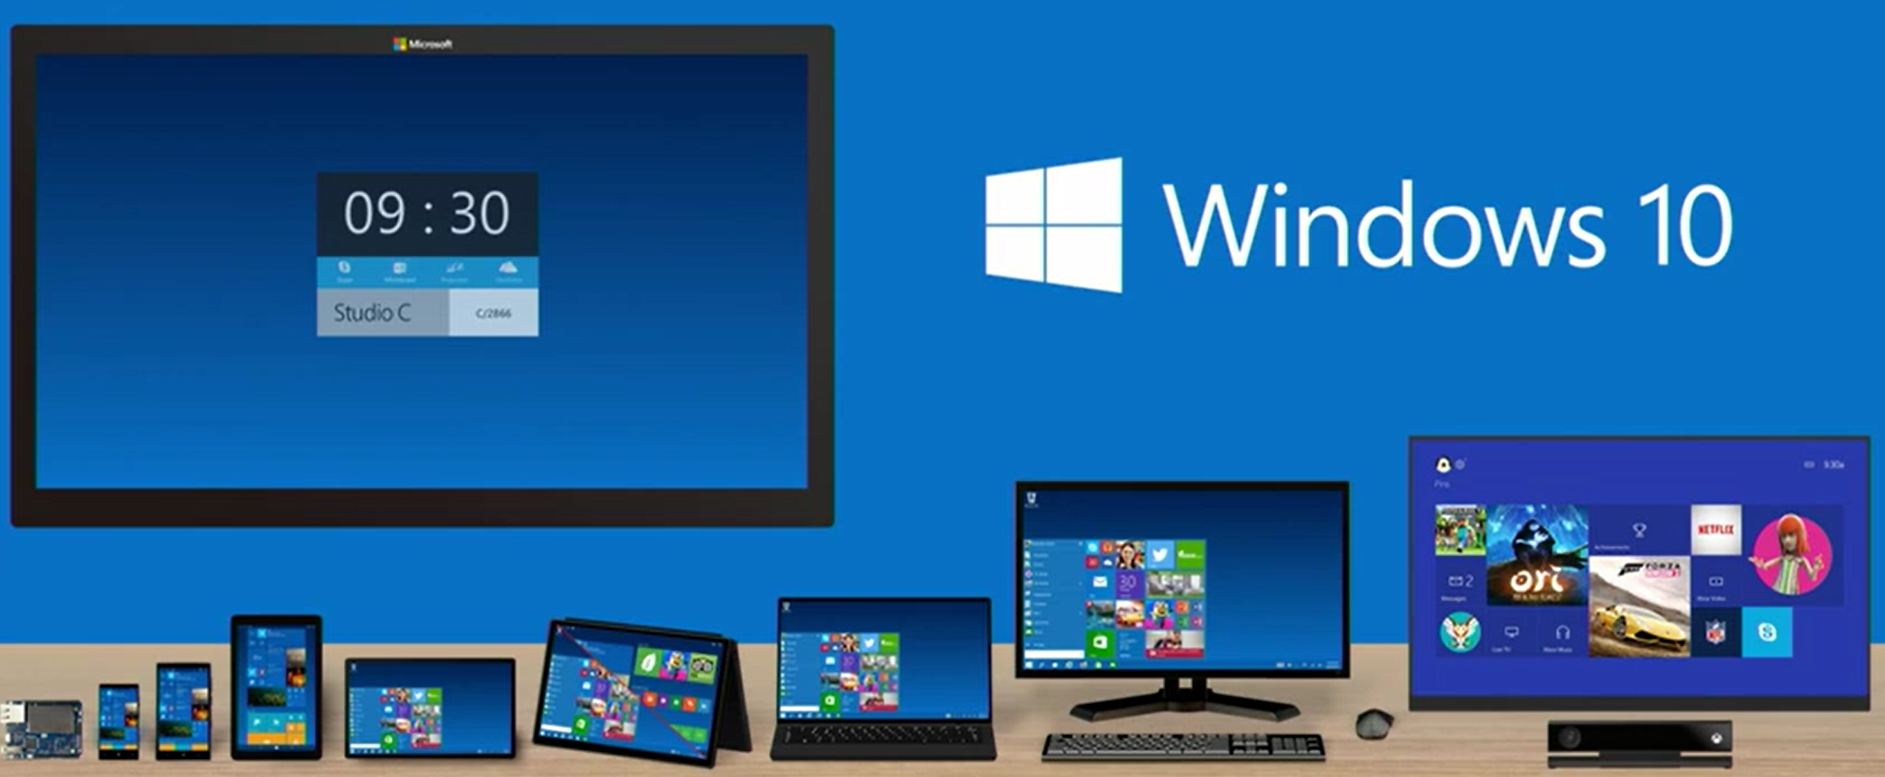 One Windows: Windows 10 will be delivered on multiple device types